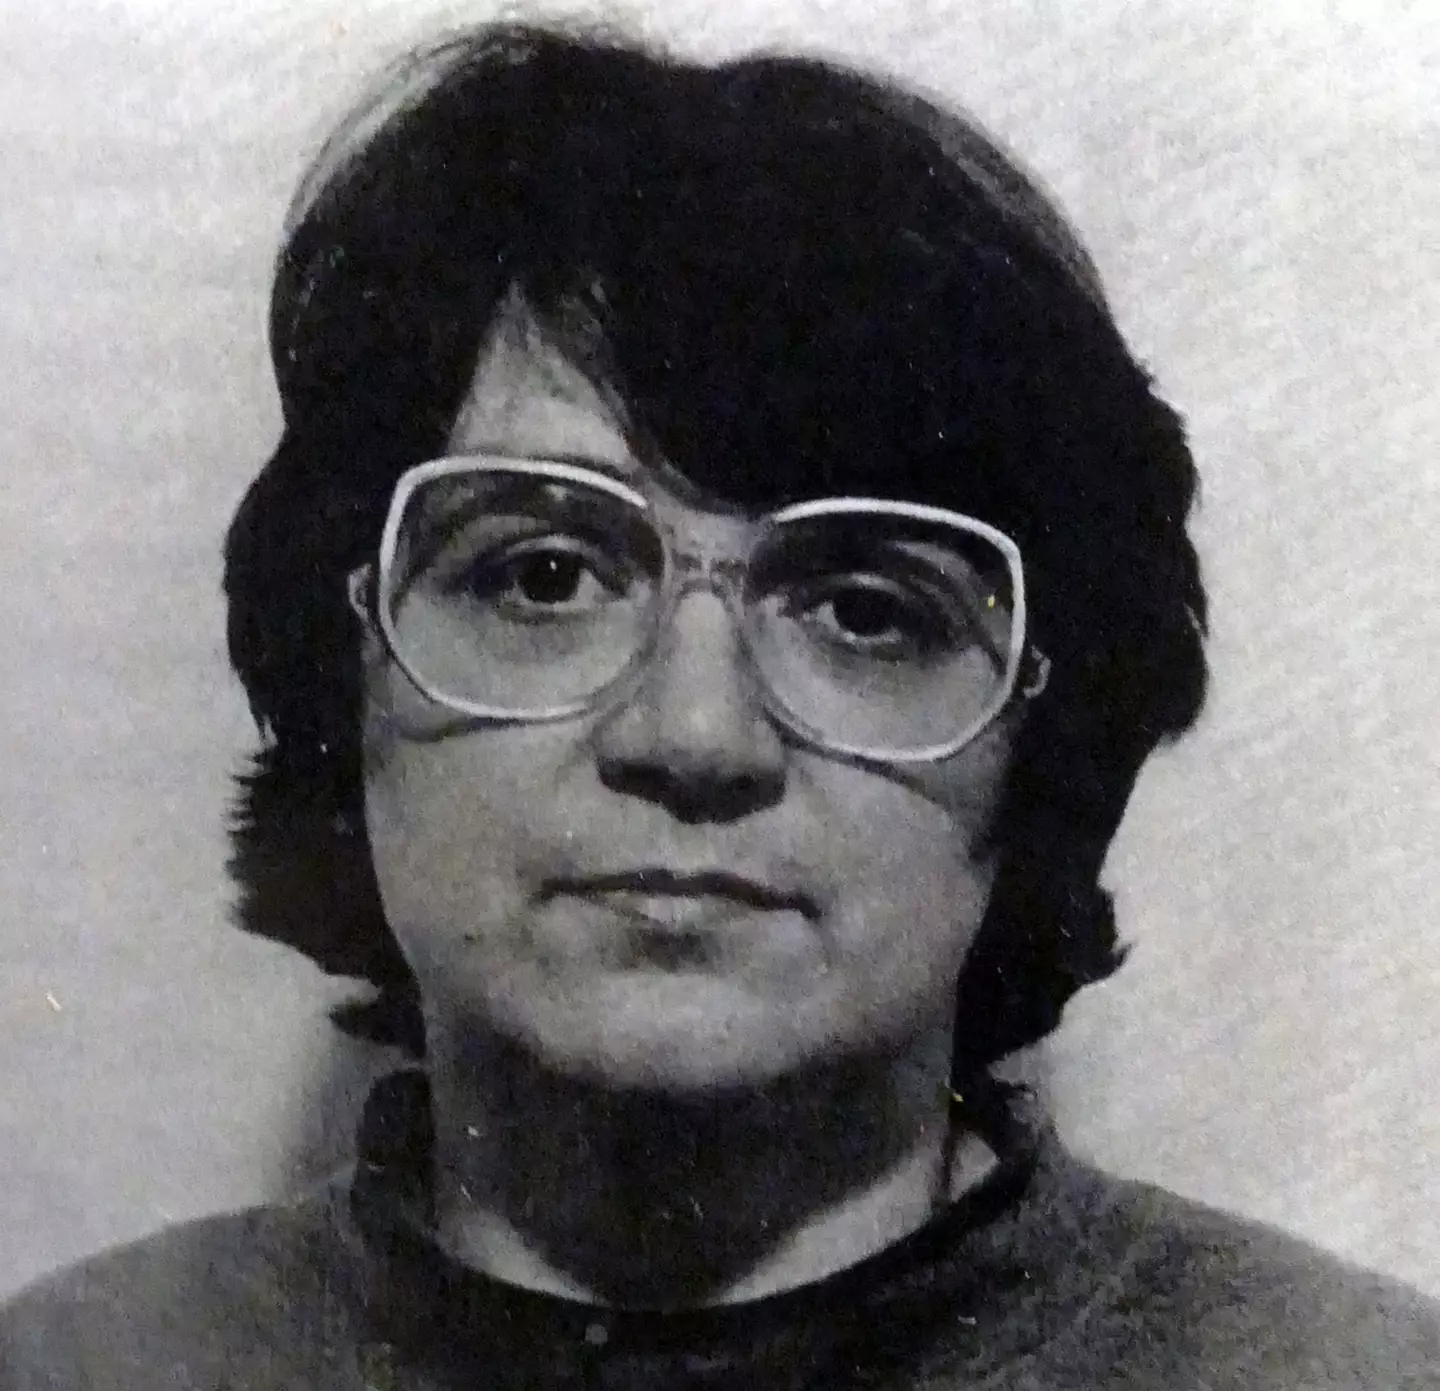 Rose West was convicted of the murders of 10 women and girls with her husband, Fred West.